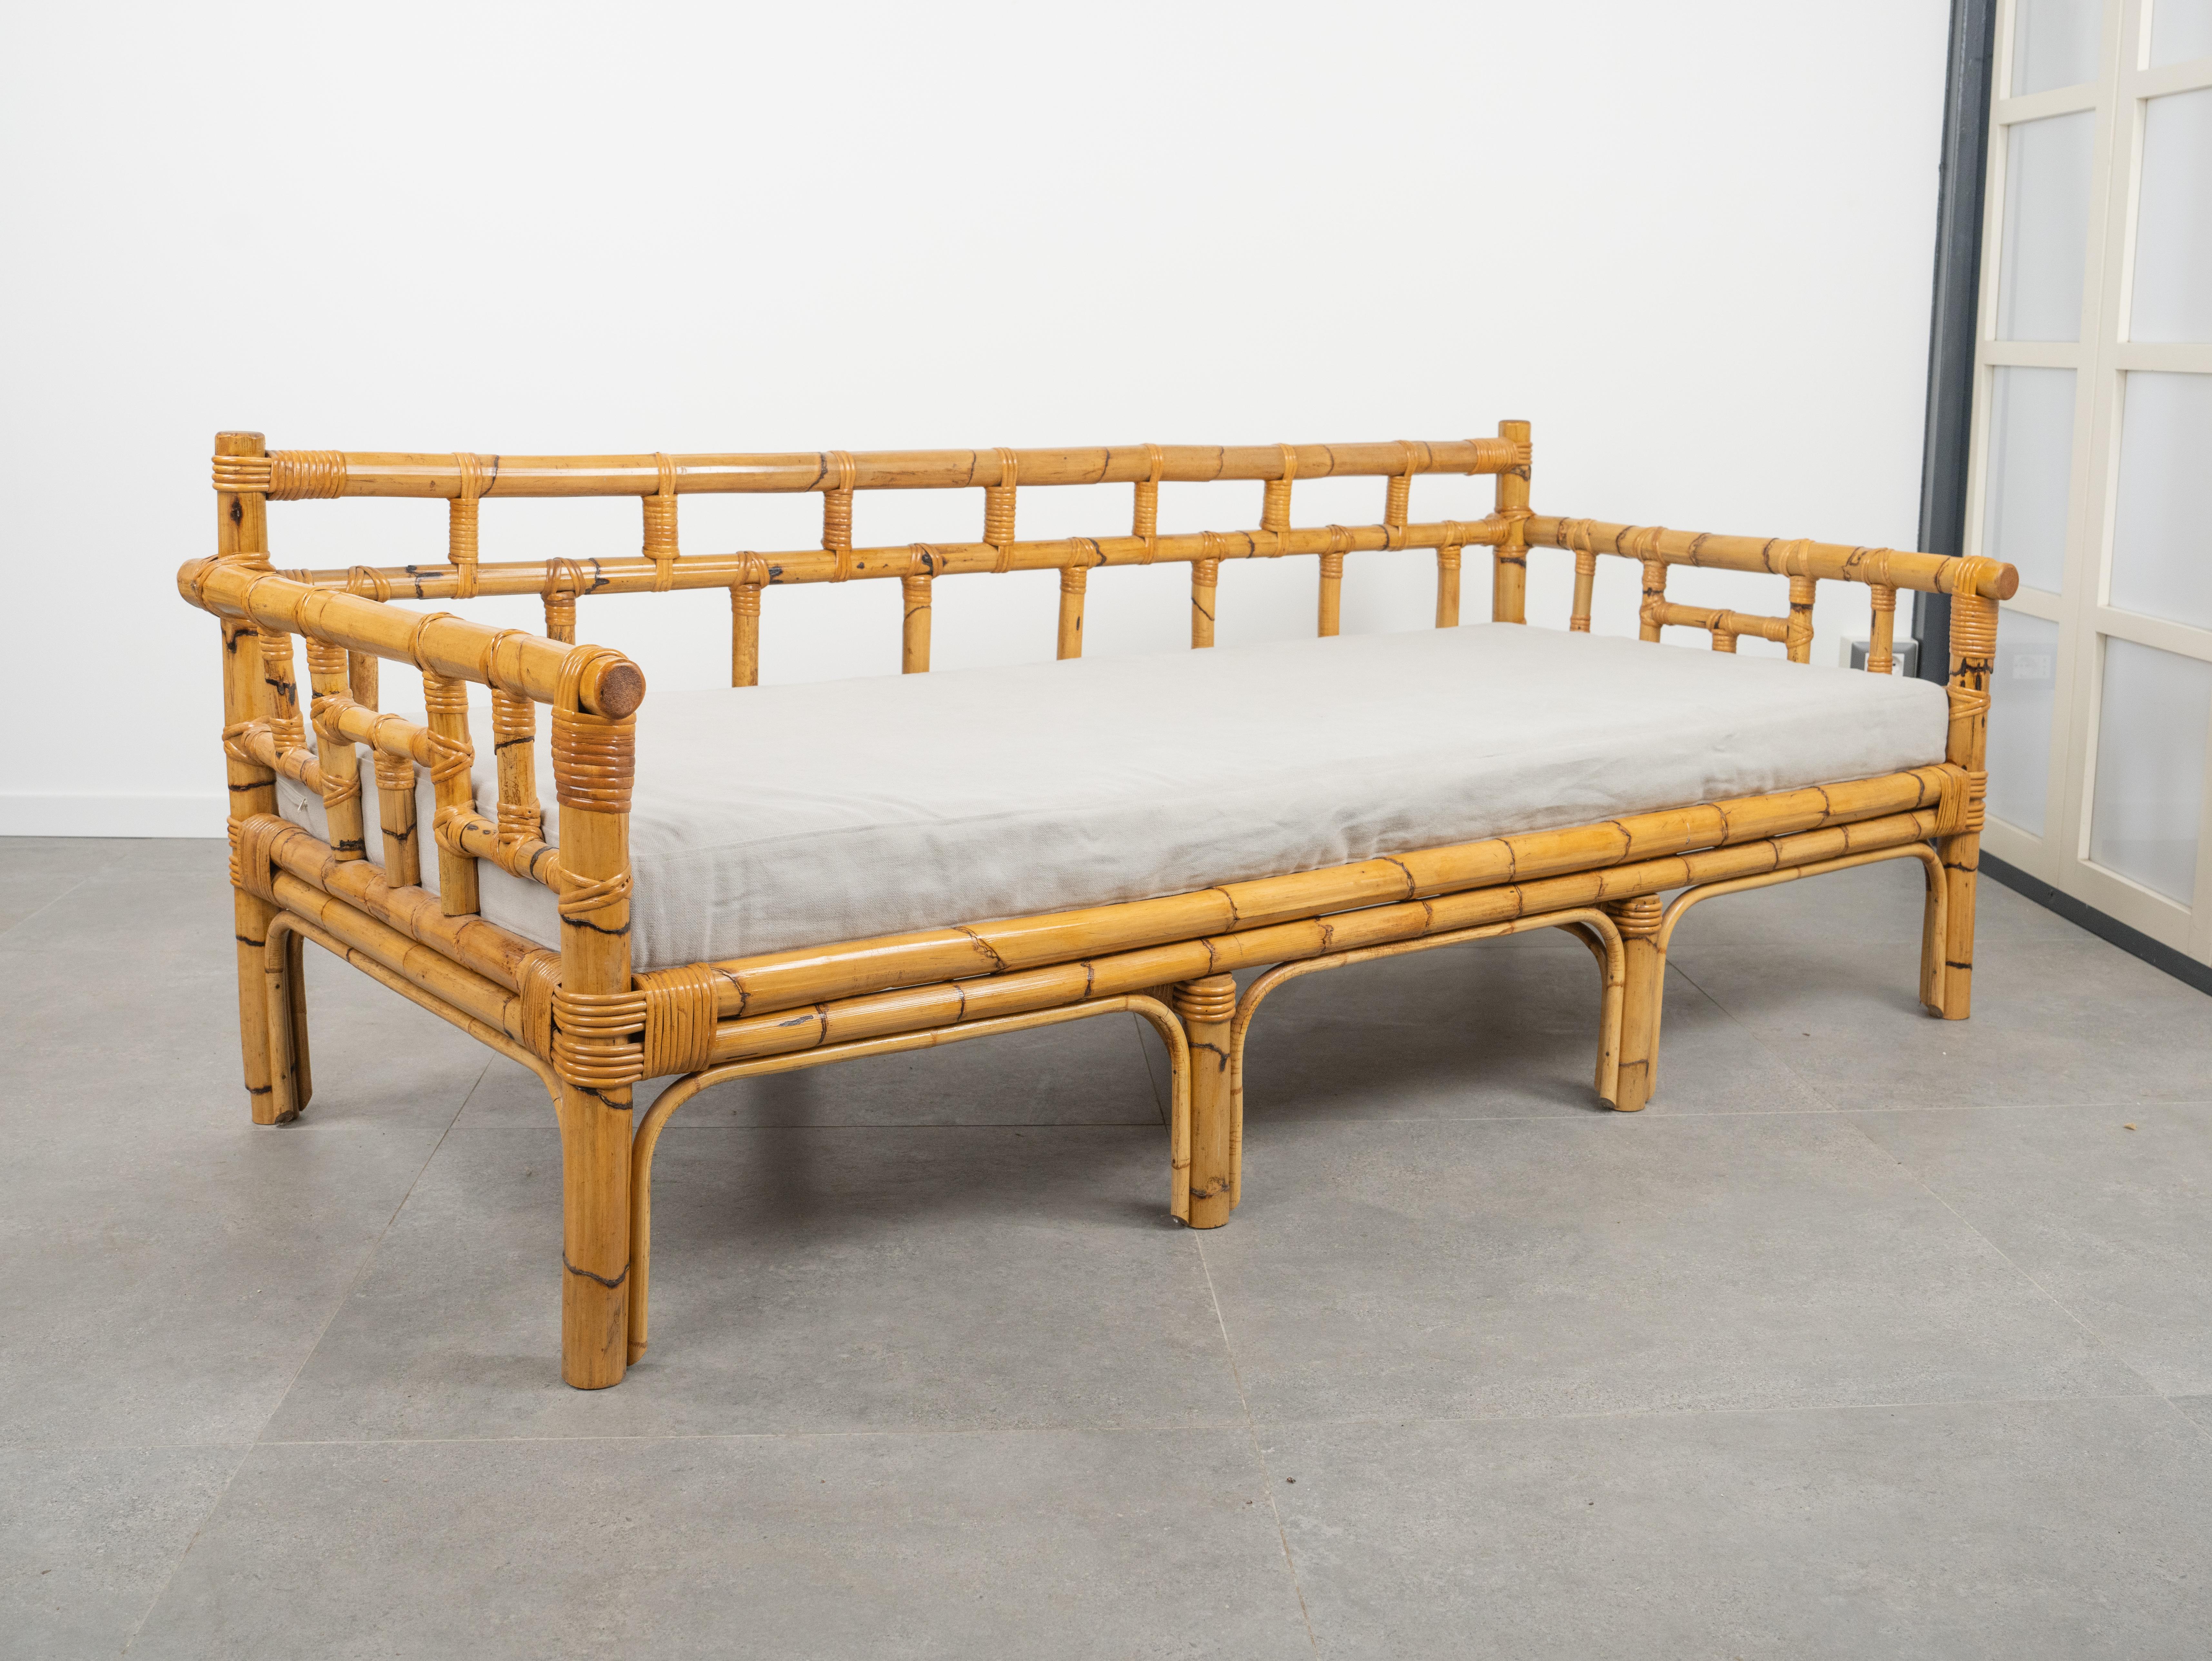 Midcentury amazing three-seat sofa in bamboo, rattan and wood by Vivai Del Sud.

Made in Italy in the 1970s.

It can be used as sofa or sofa bed.

Vivai del sud, Gabriella Crespi and Arpex were the three leading design studios in 1970s Italy